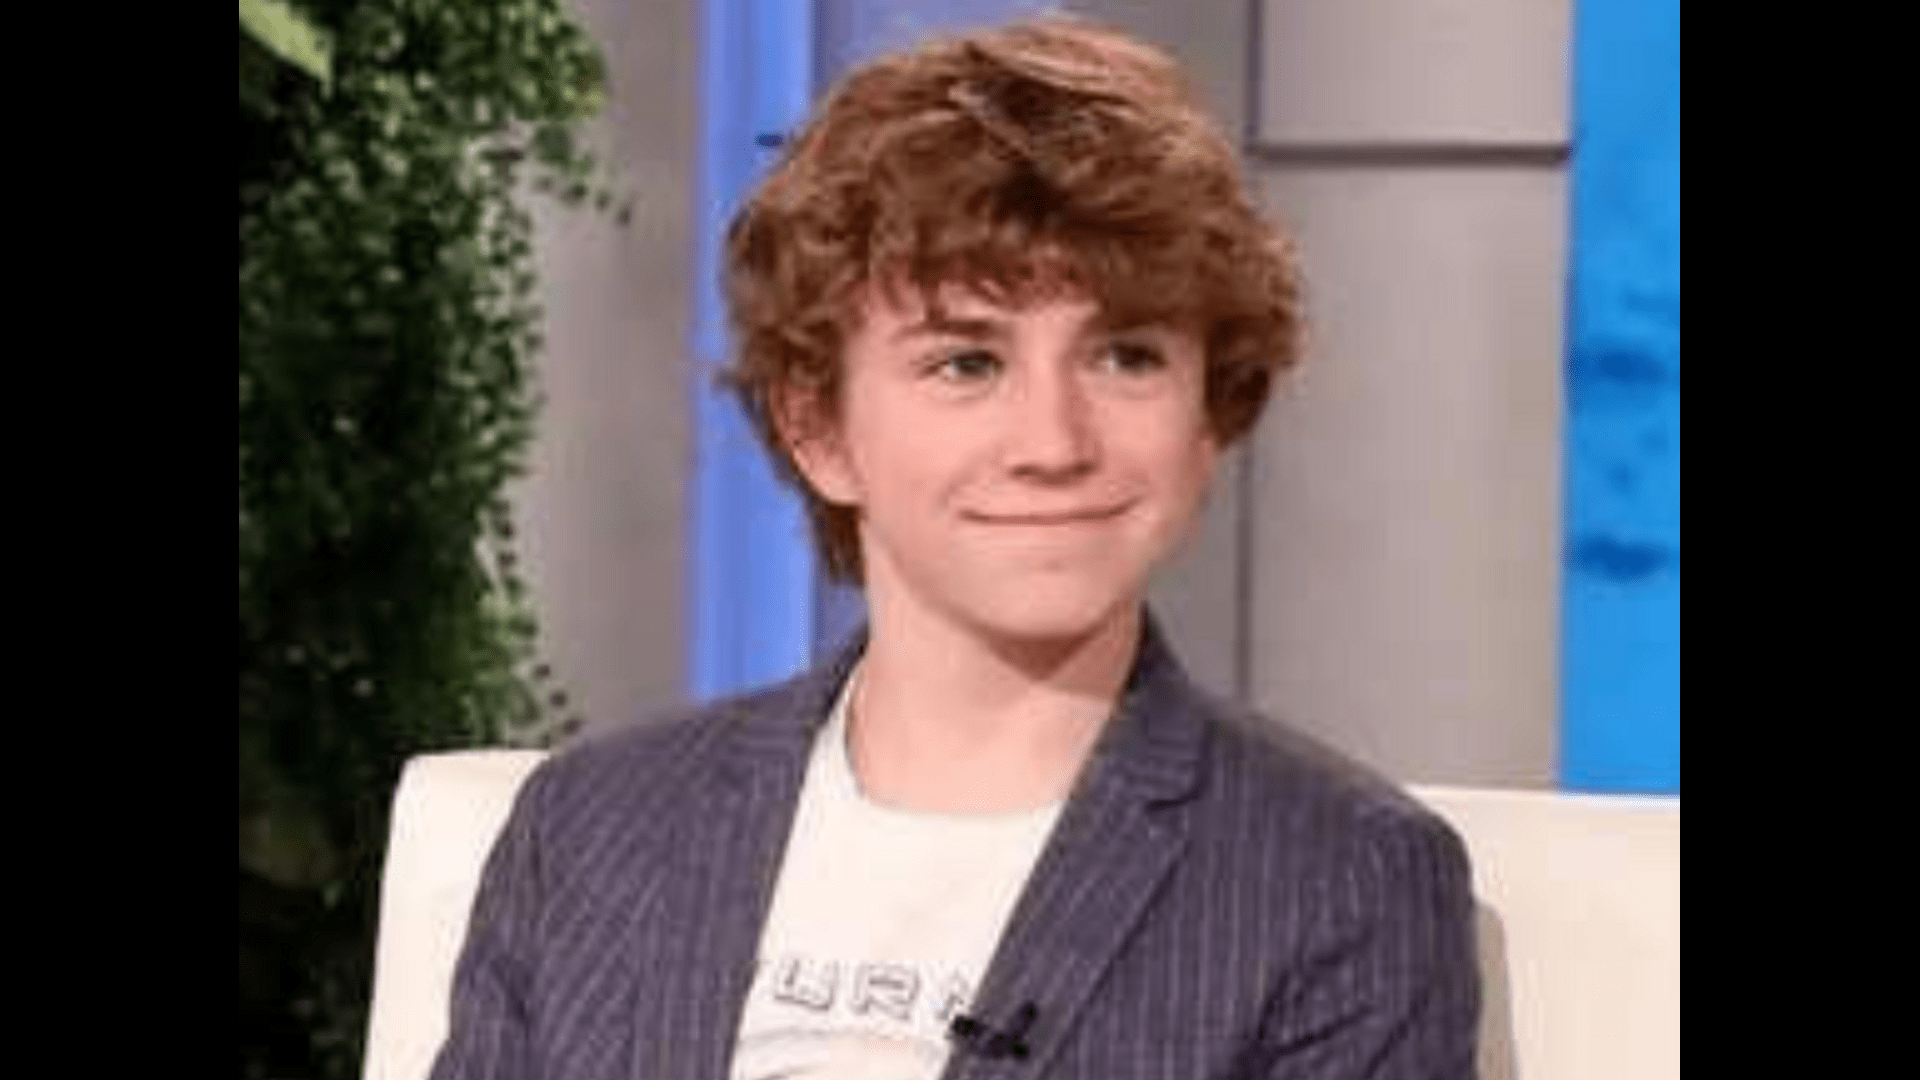 'Project Adam' star to become the new Percy Jackson